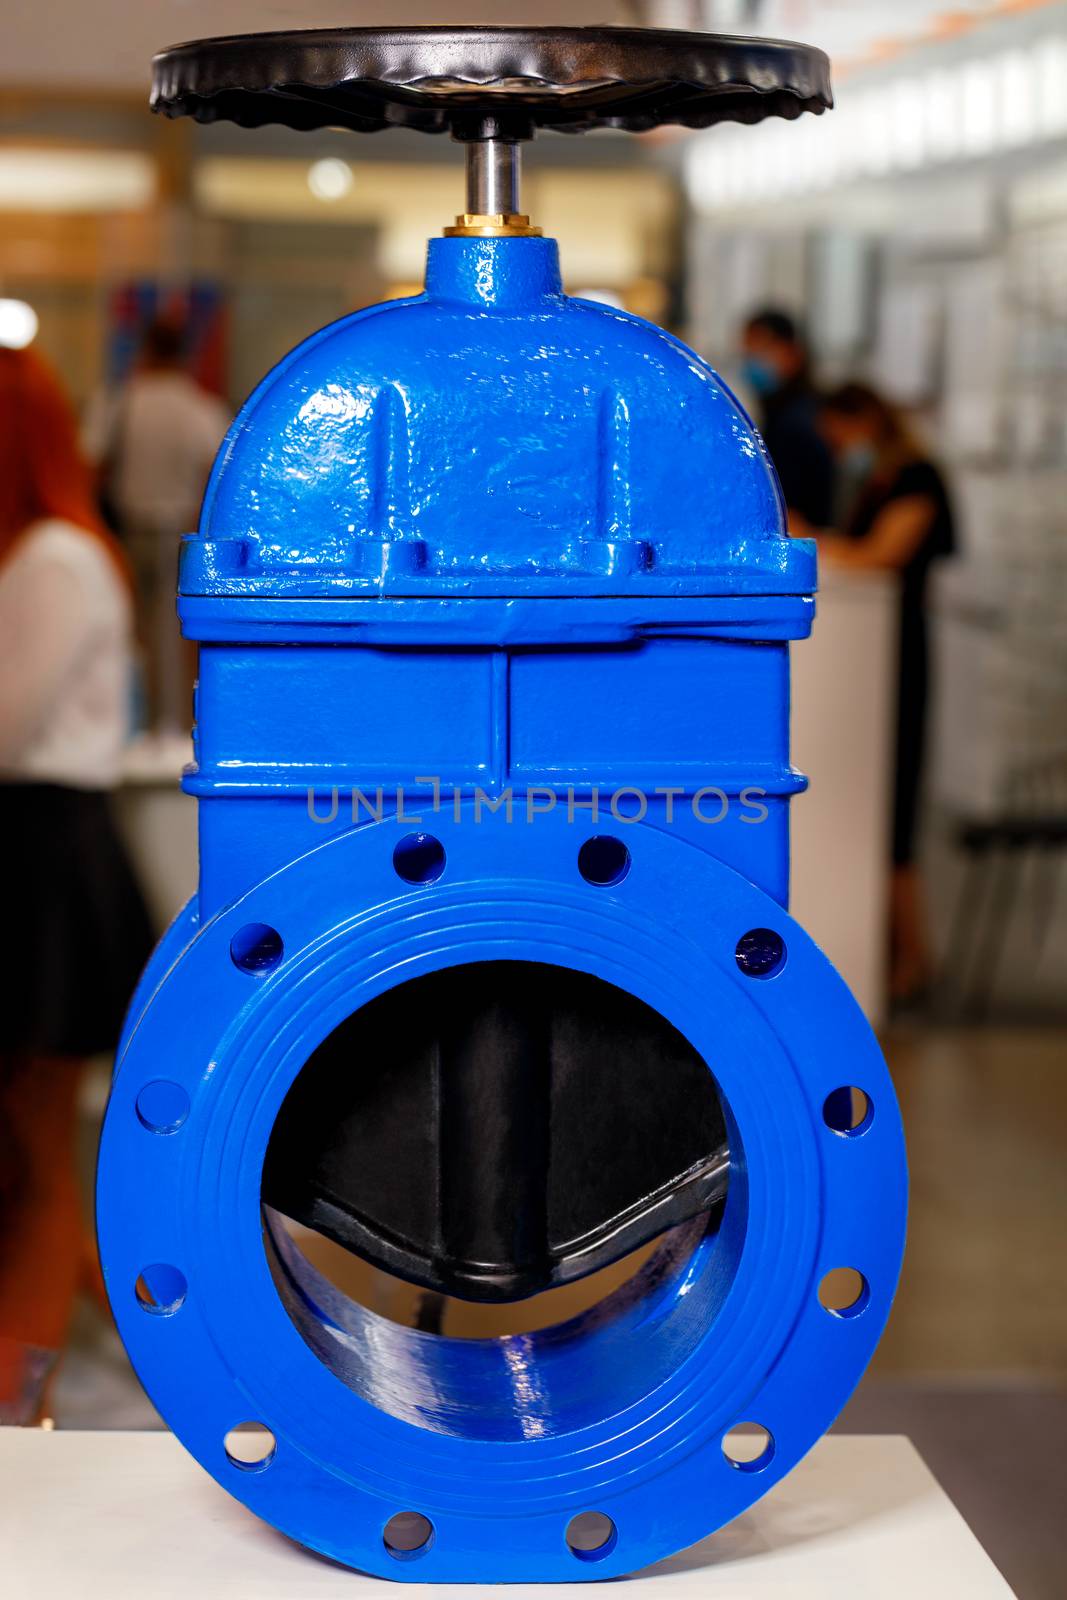 Cast iron metal shut-off industrial gate valve with a rubber wedge. by Sergii